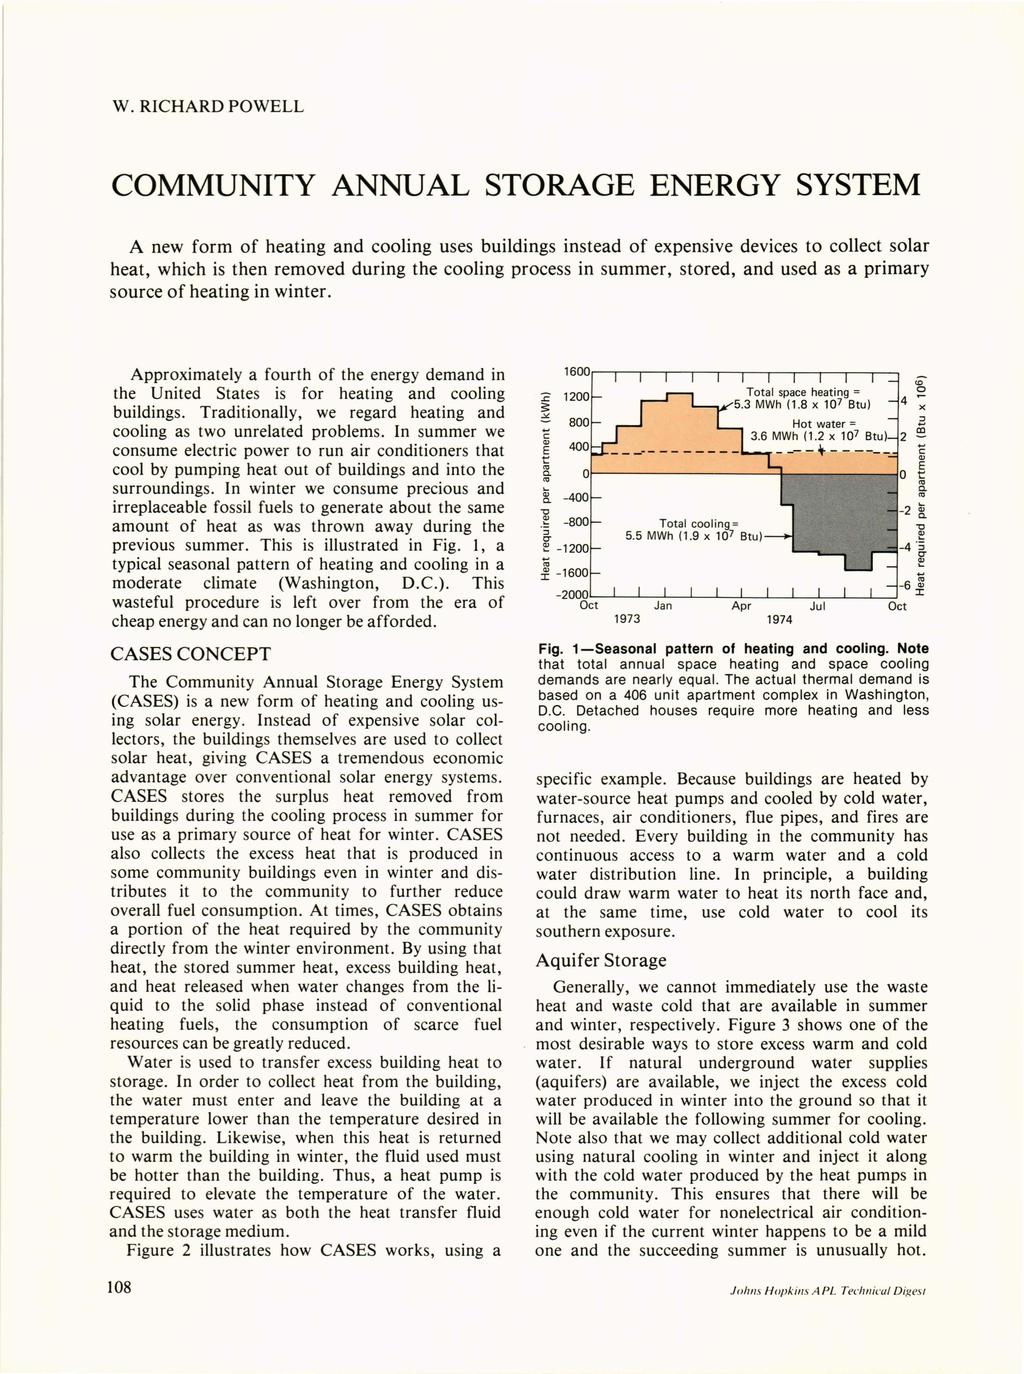 W. RICHARD POWELL COMMUNITY ANNUAL STORAGE ENERGY SYSTEM A new form of heating and cooling uses buildings instead of expensive devices to collect solar heat, which is then removed during the cooling